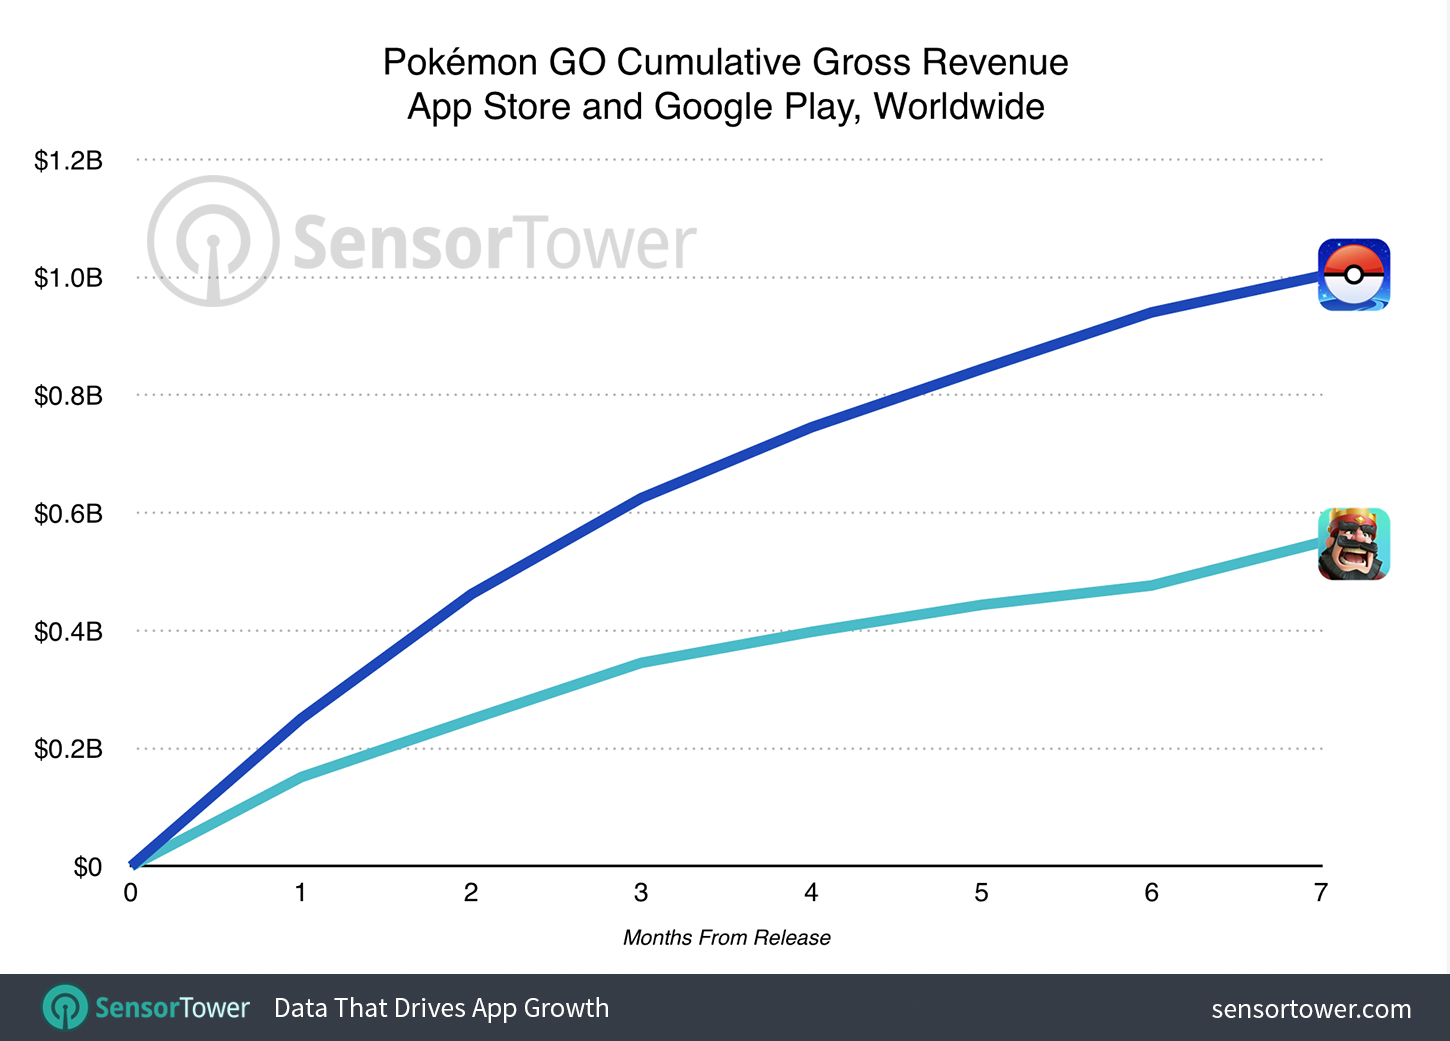 Pokémon GO' Has Made $1.8 Billion As It Turns Two Years Old